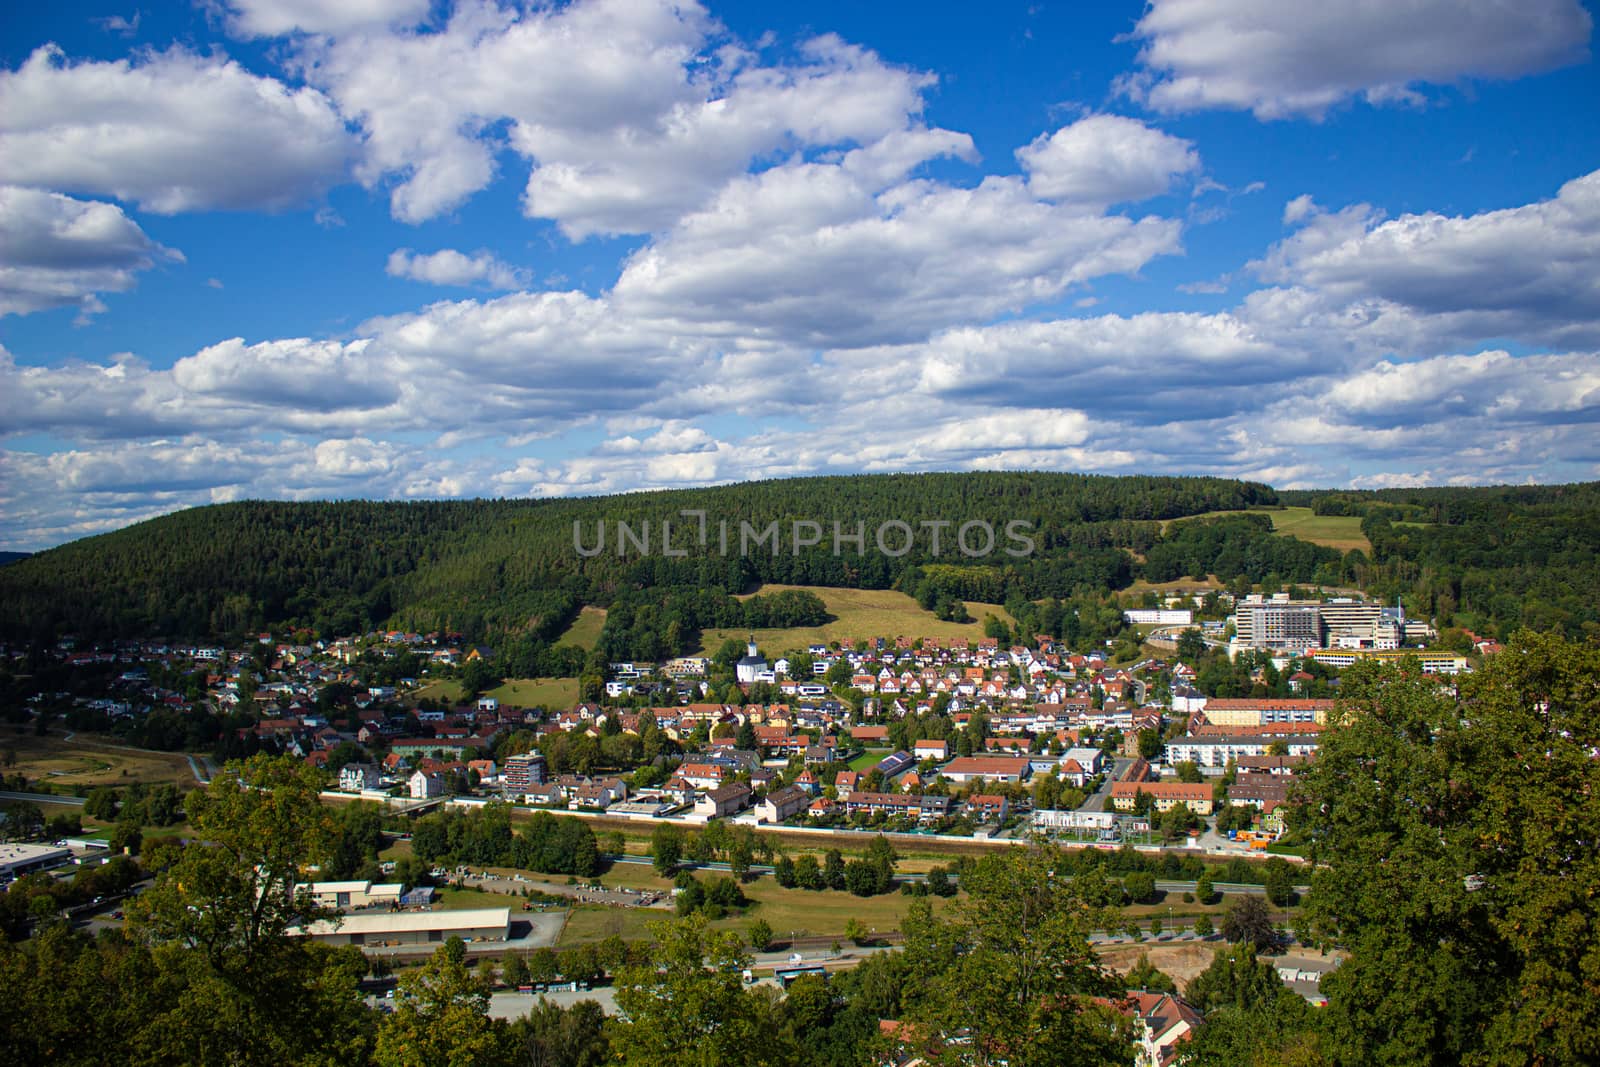 Mountain view of the city, in Germany. Walk through the Castle grounds.